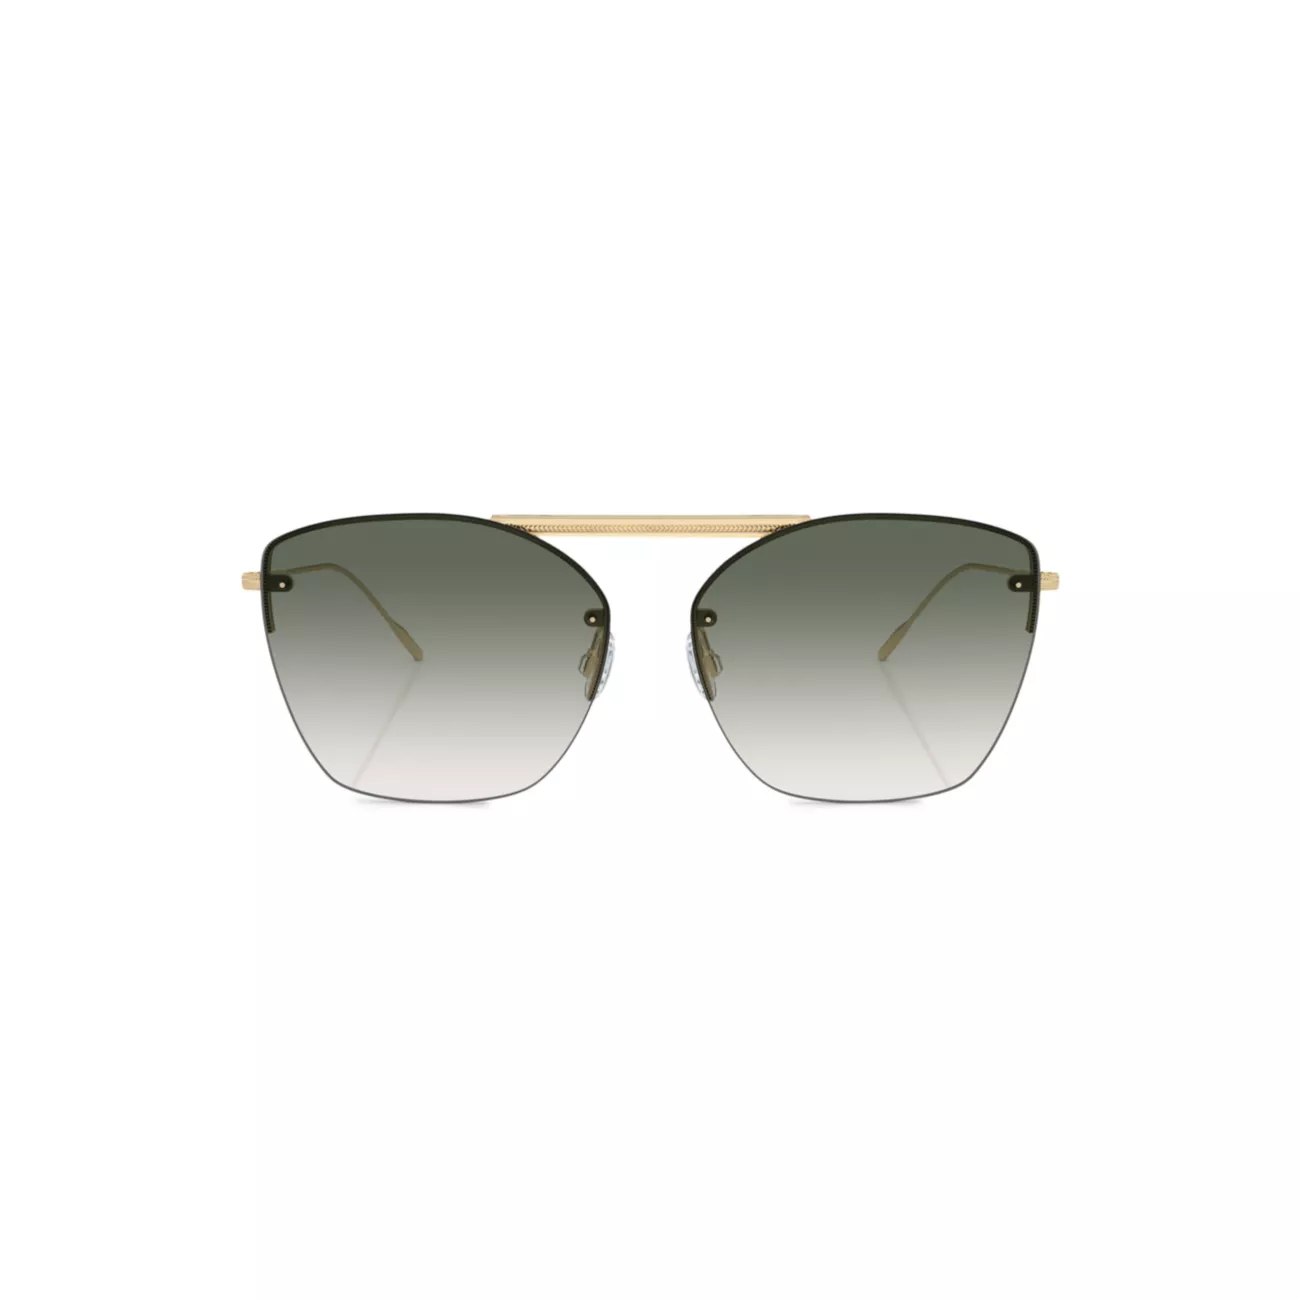 Ziane 61MM Rimless Pilot Sunglasses Oliver Peoples